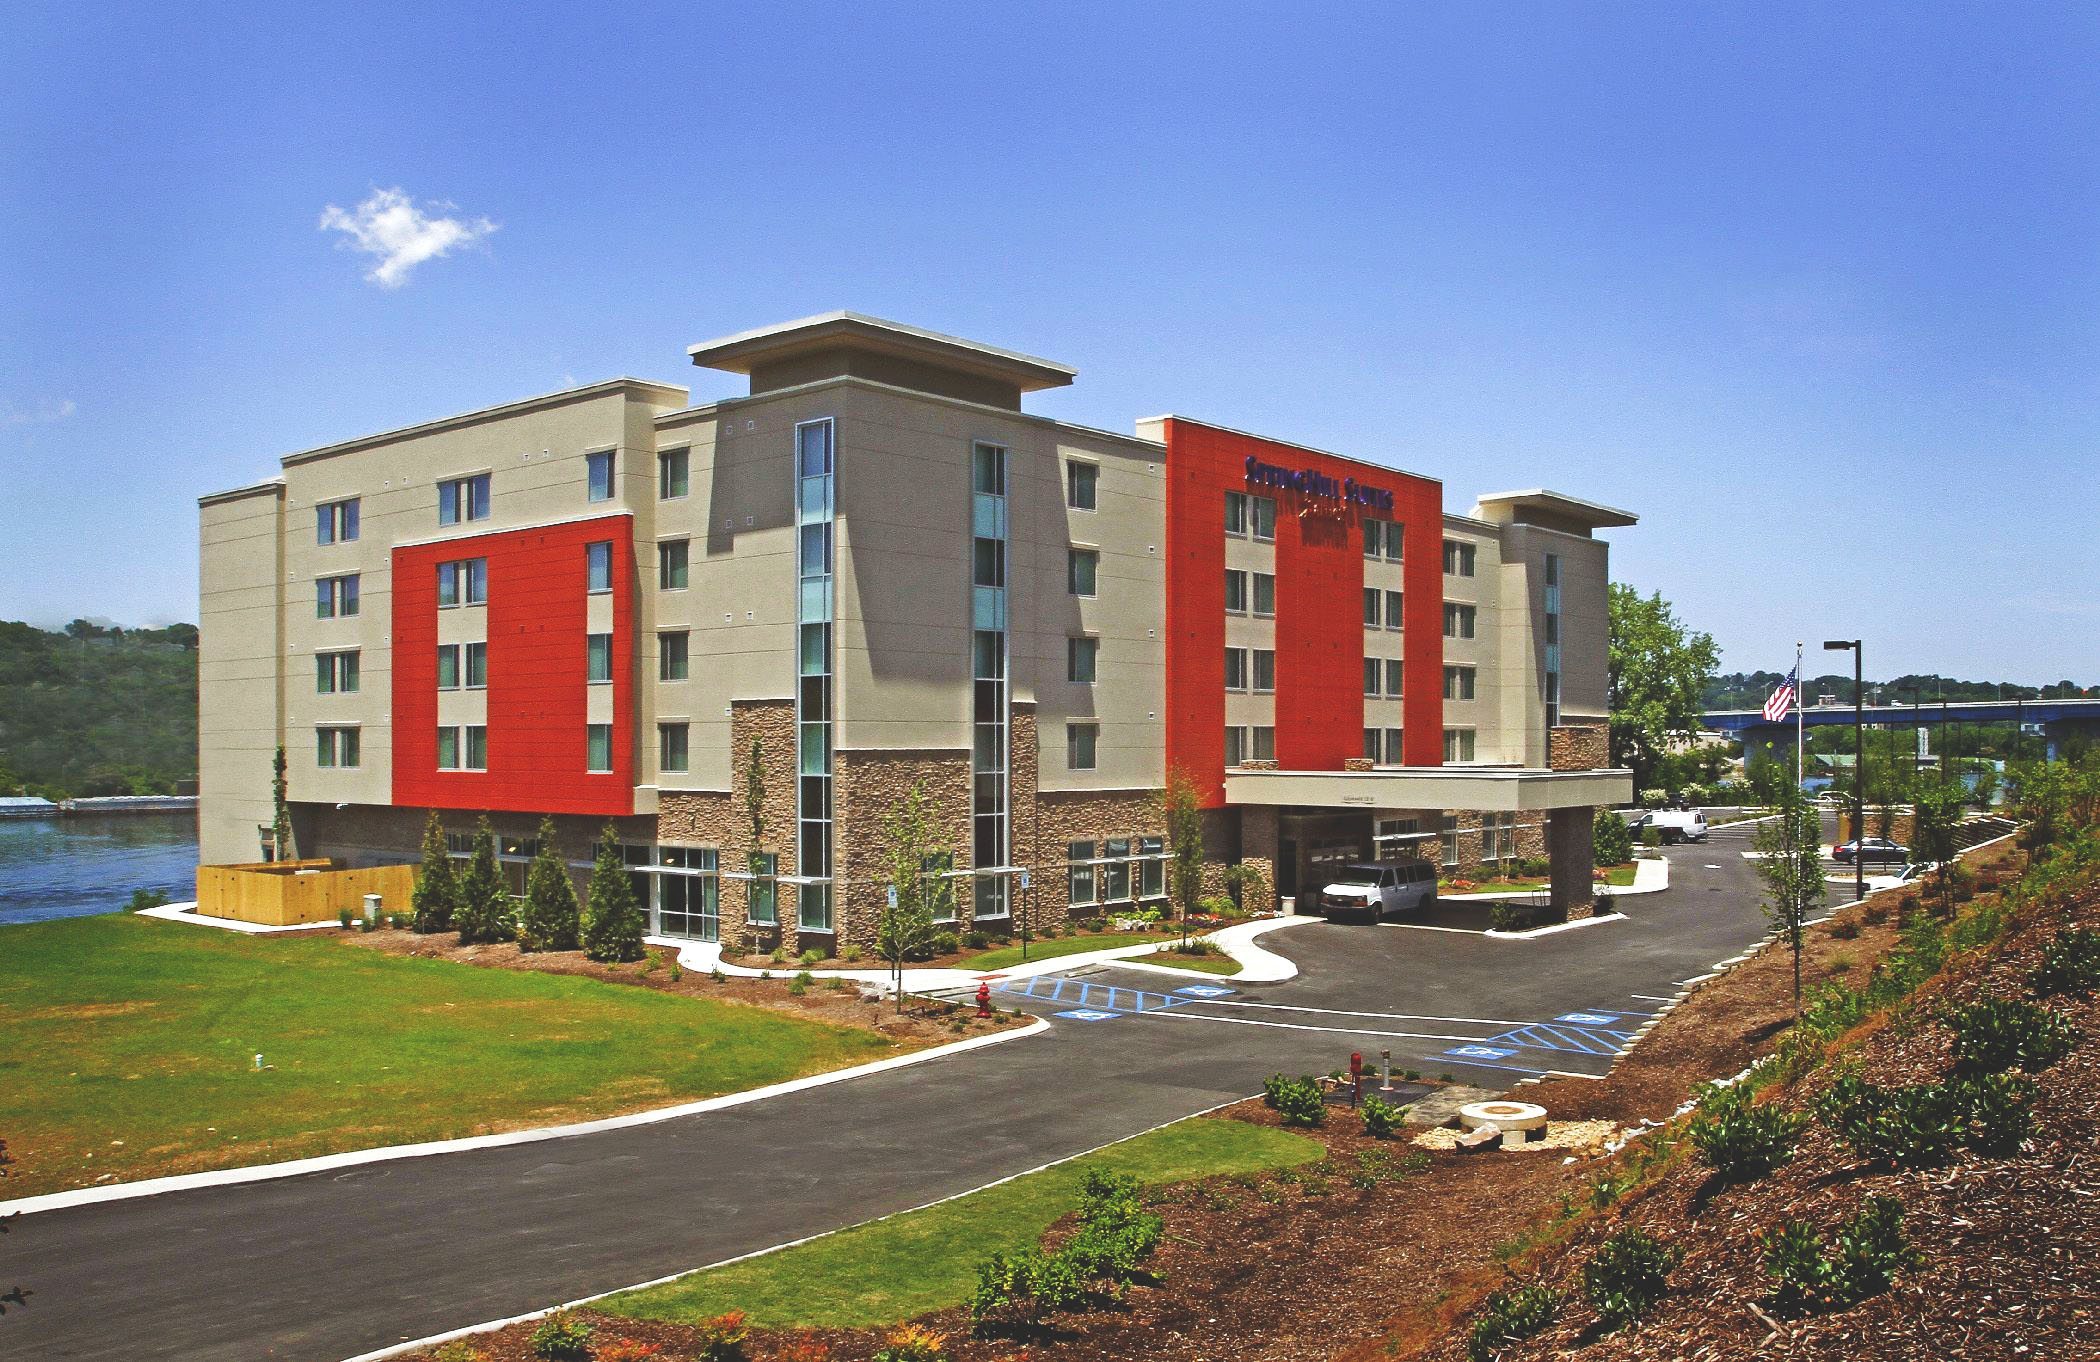 SpringHill-Suites-Chattanooga-TN-2-1